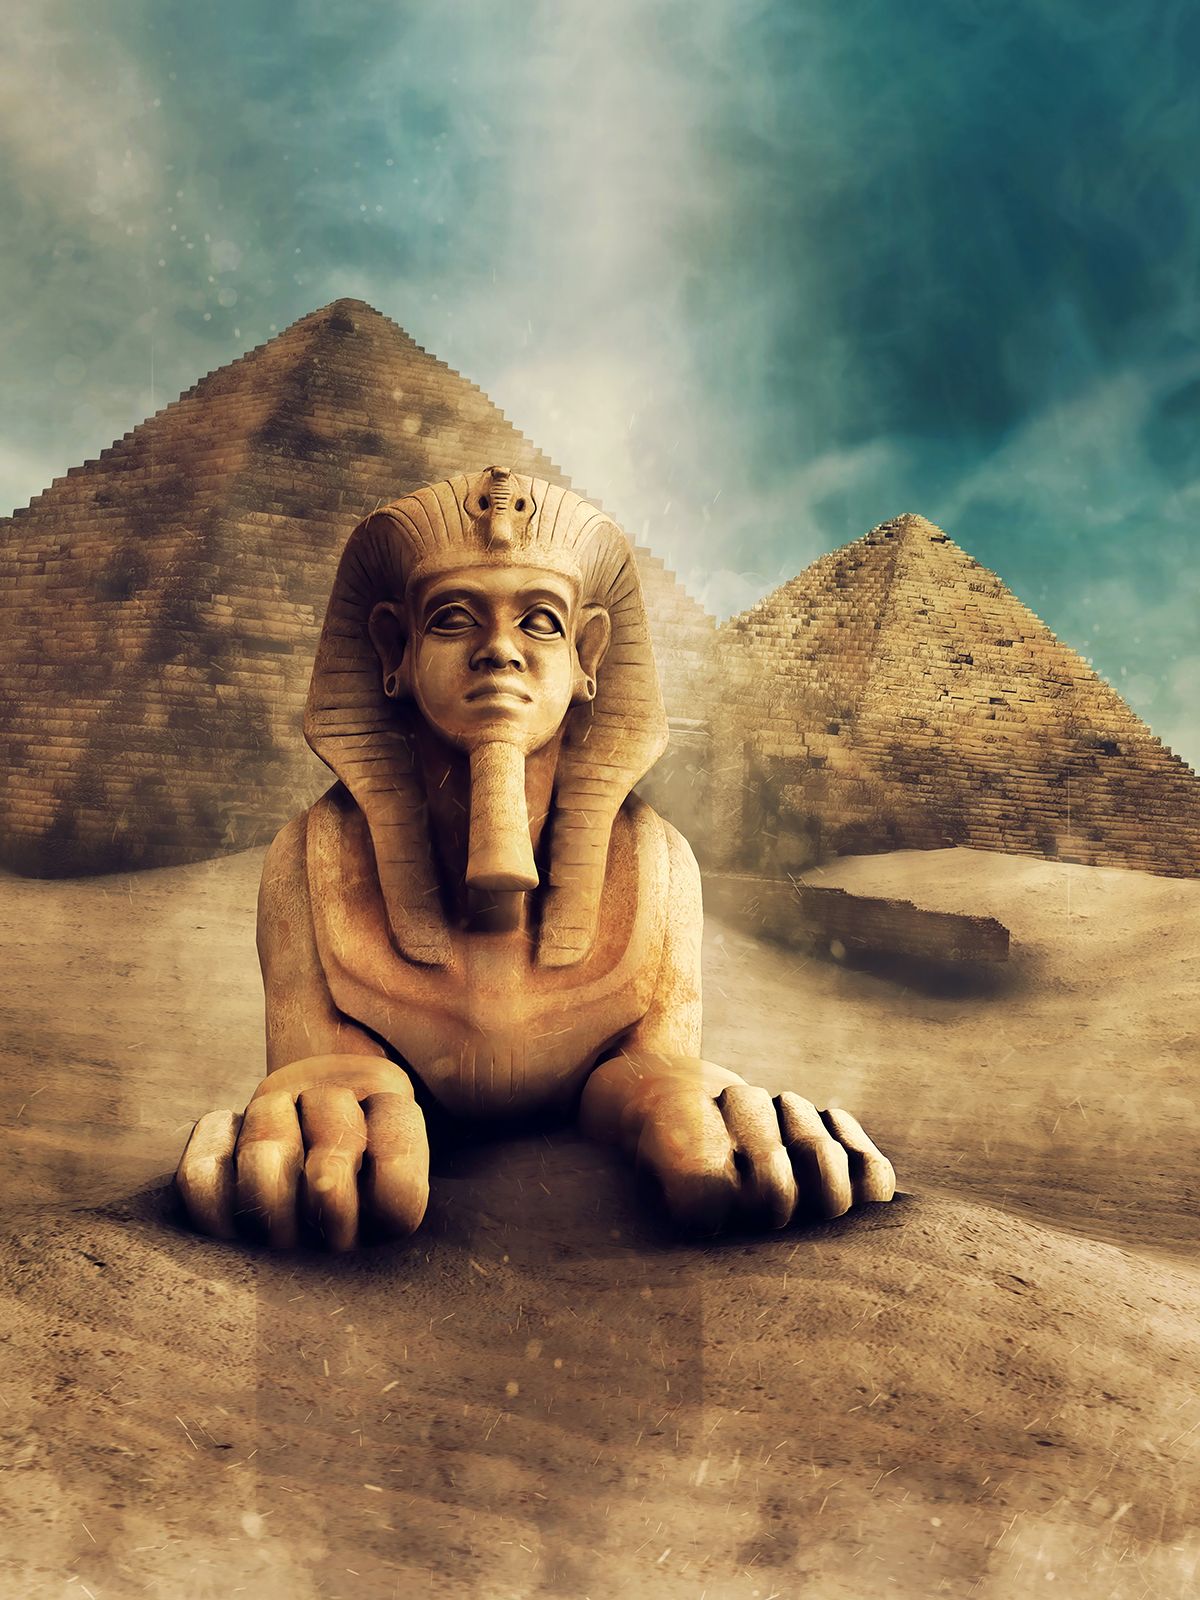 Desert,Landscape,With,A,Stone,Statue,Of,A,Sphinx,And